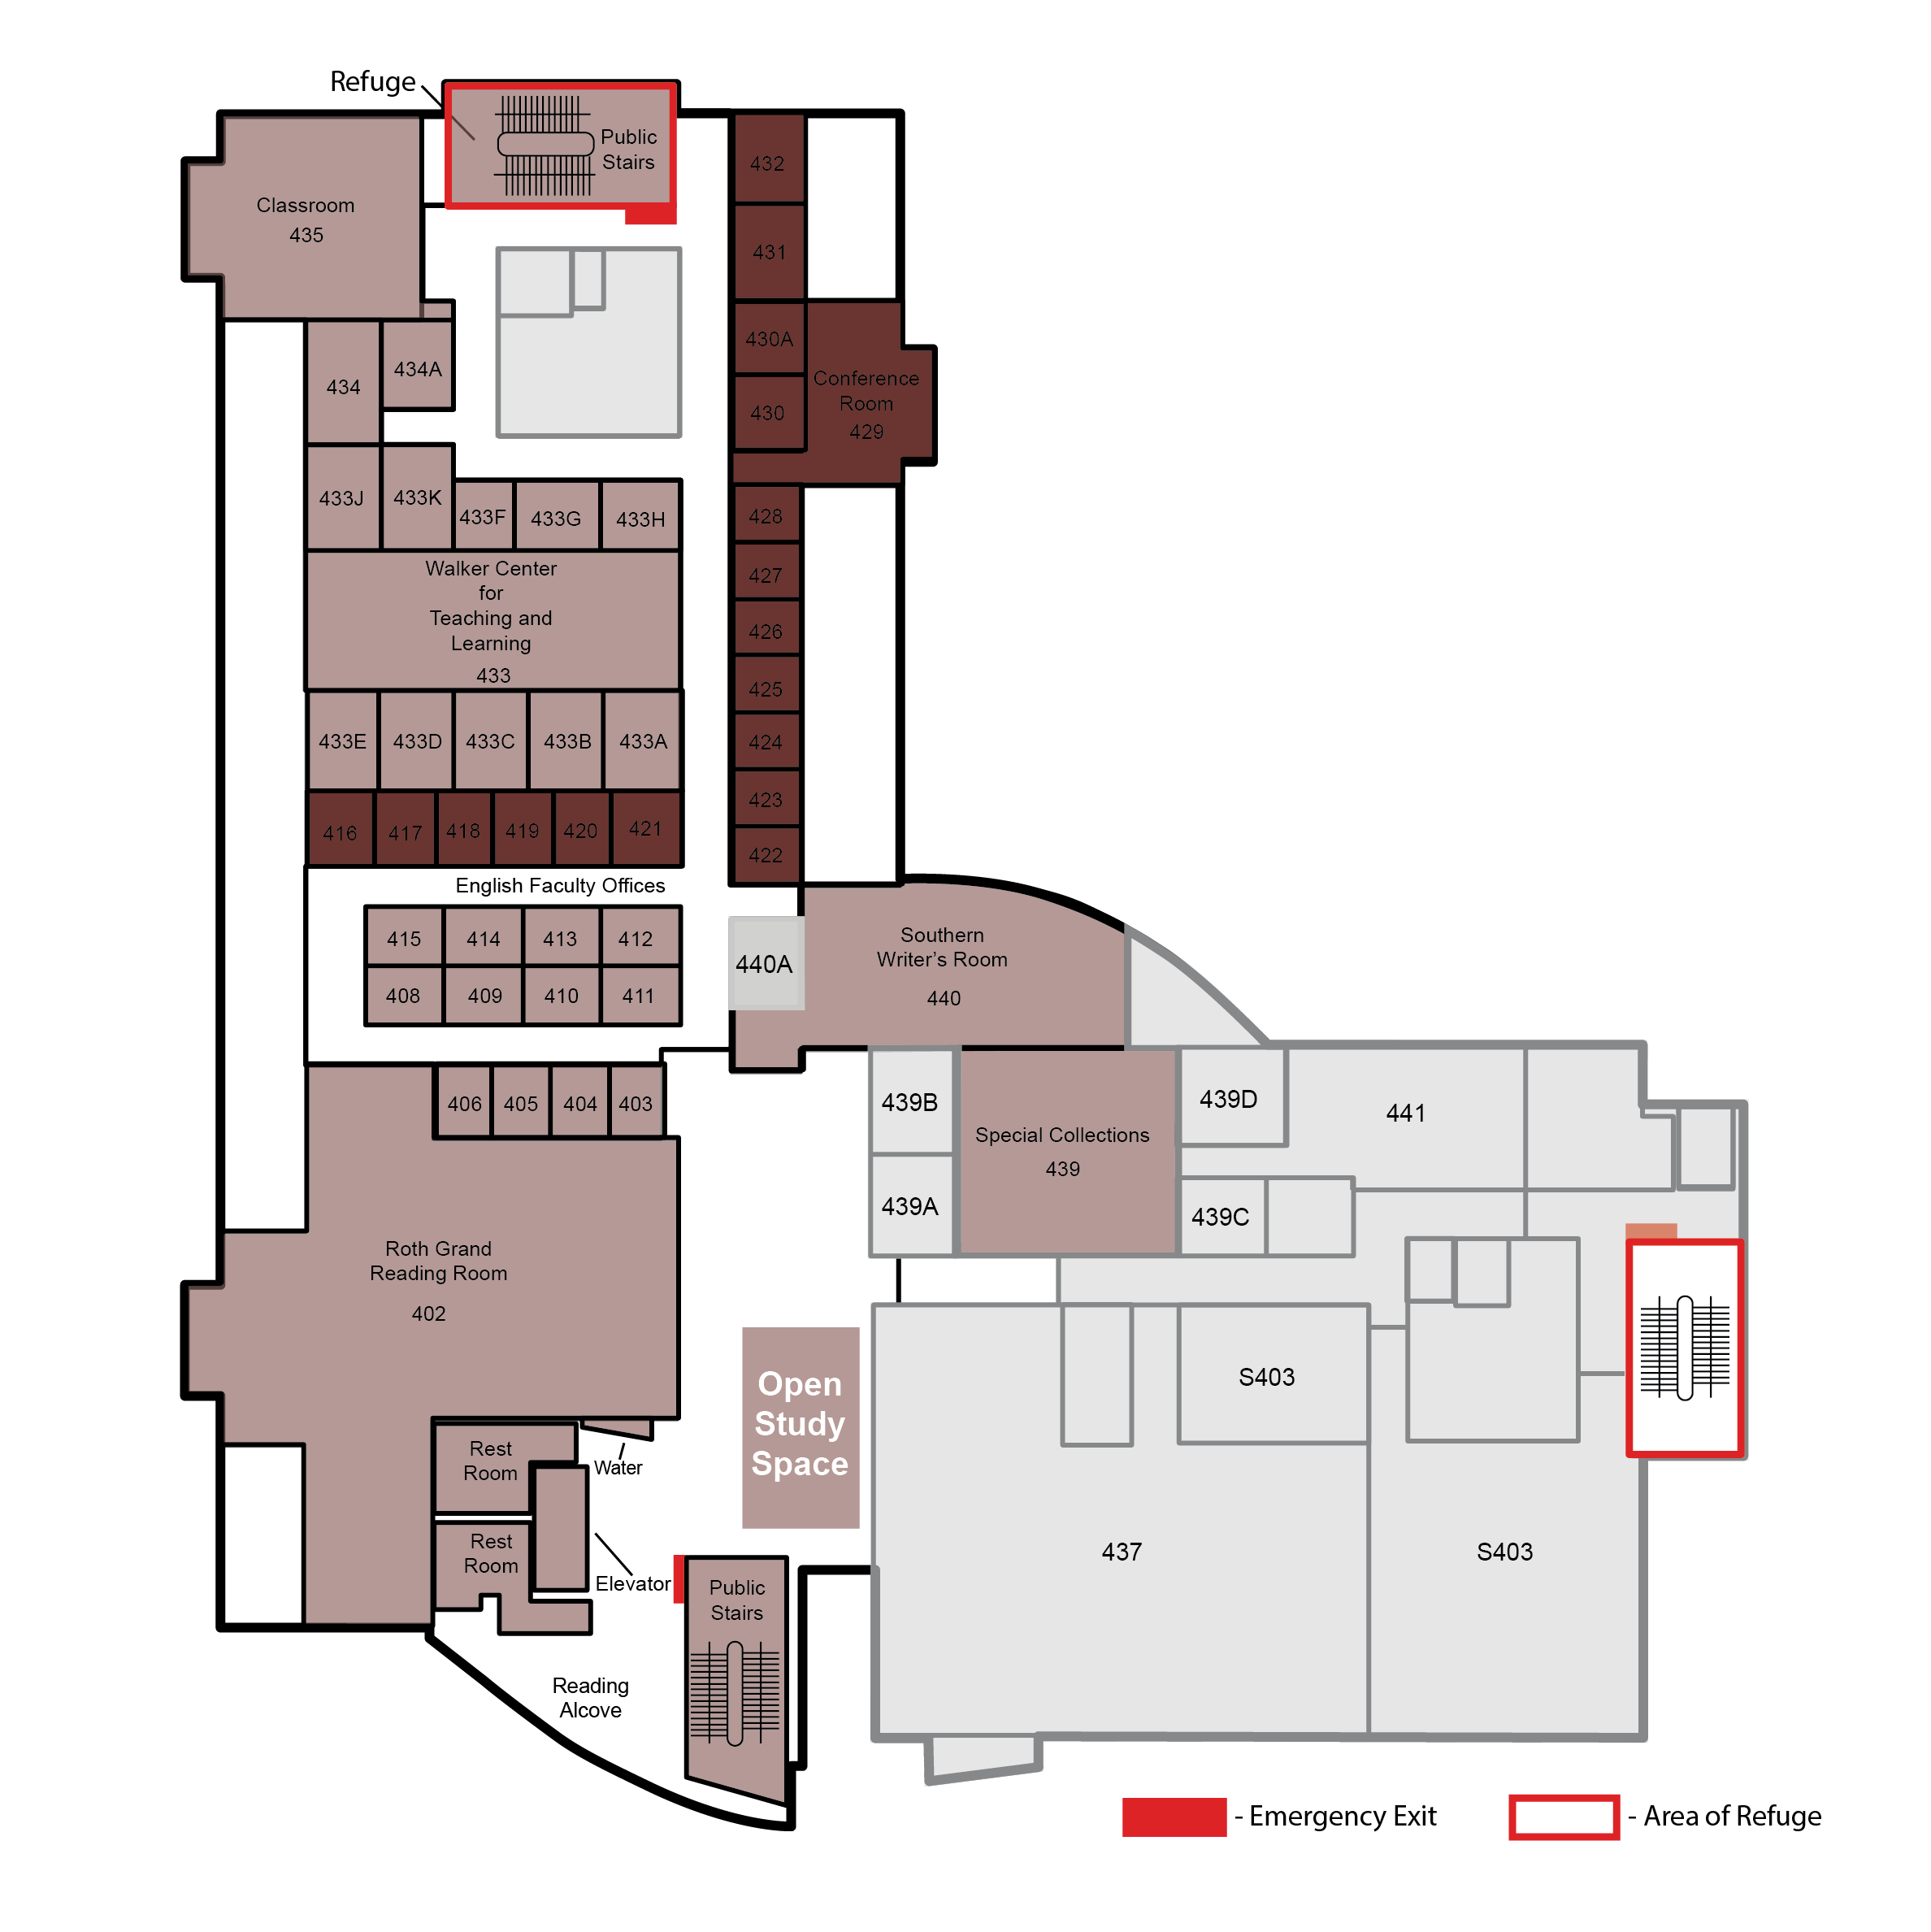 map of fourth floor of utc library